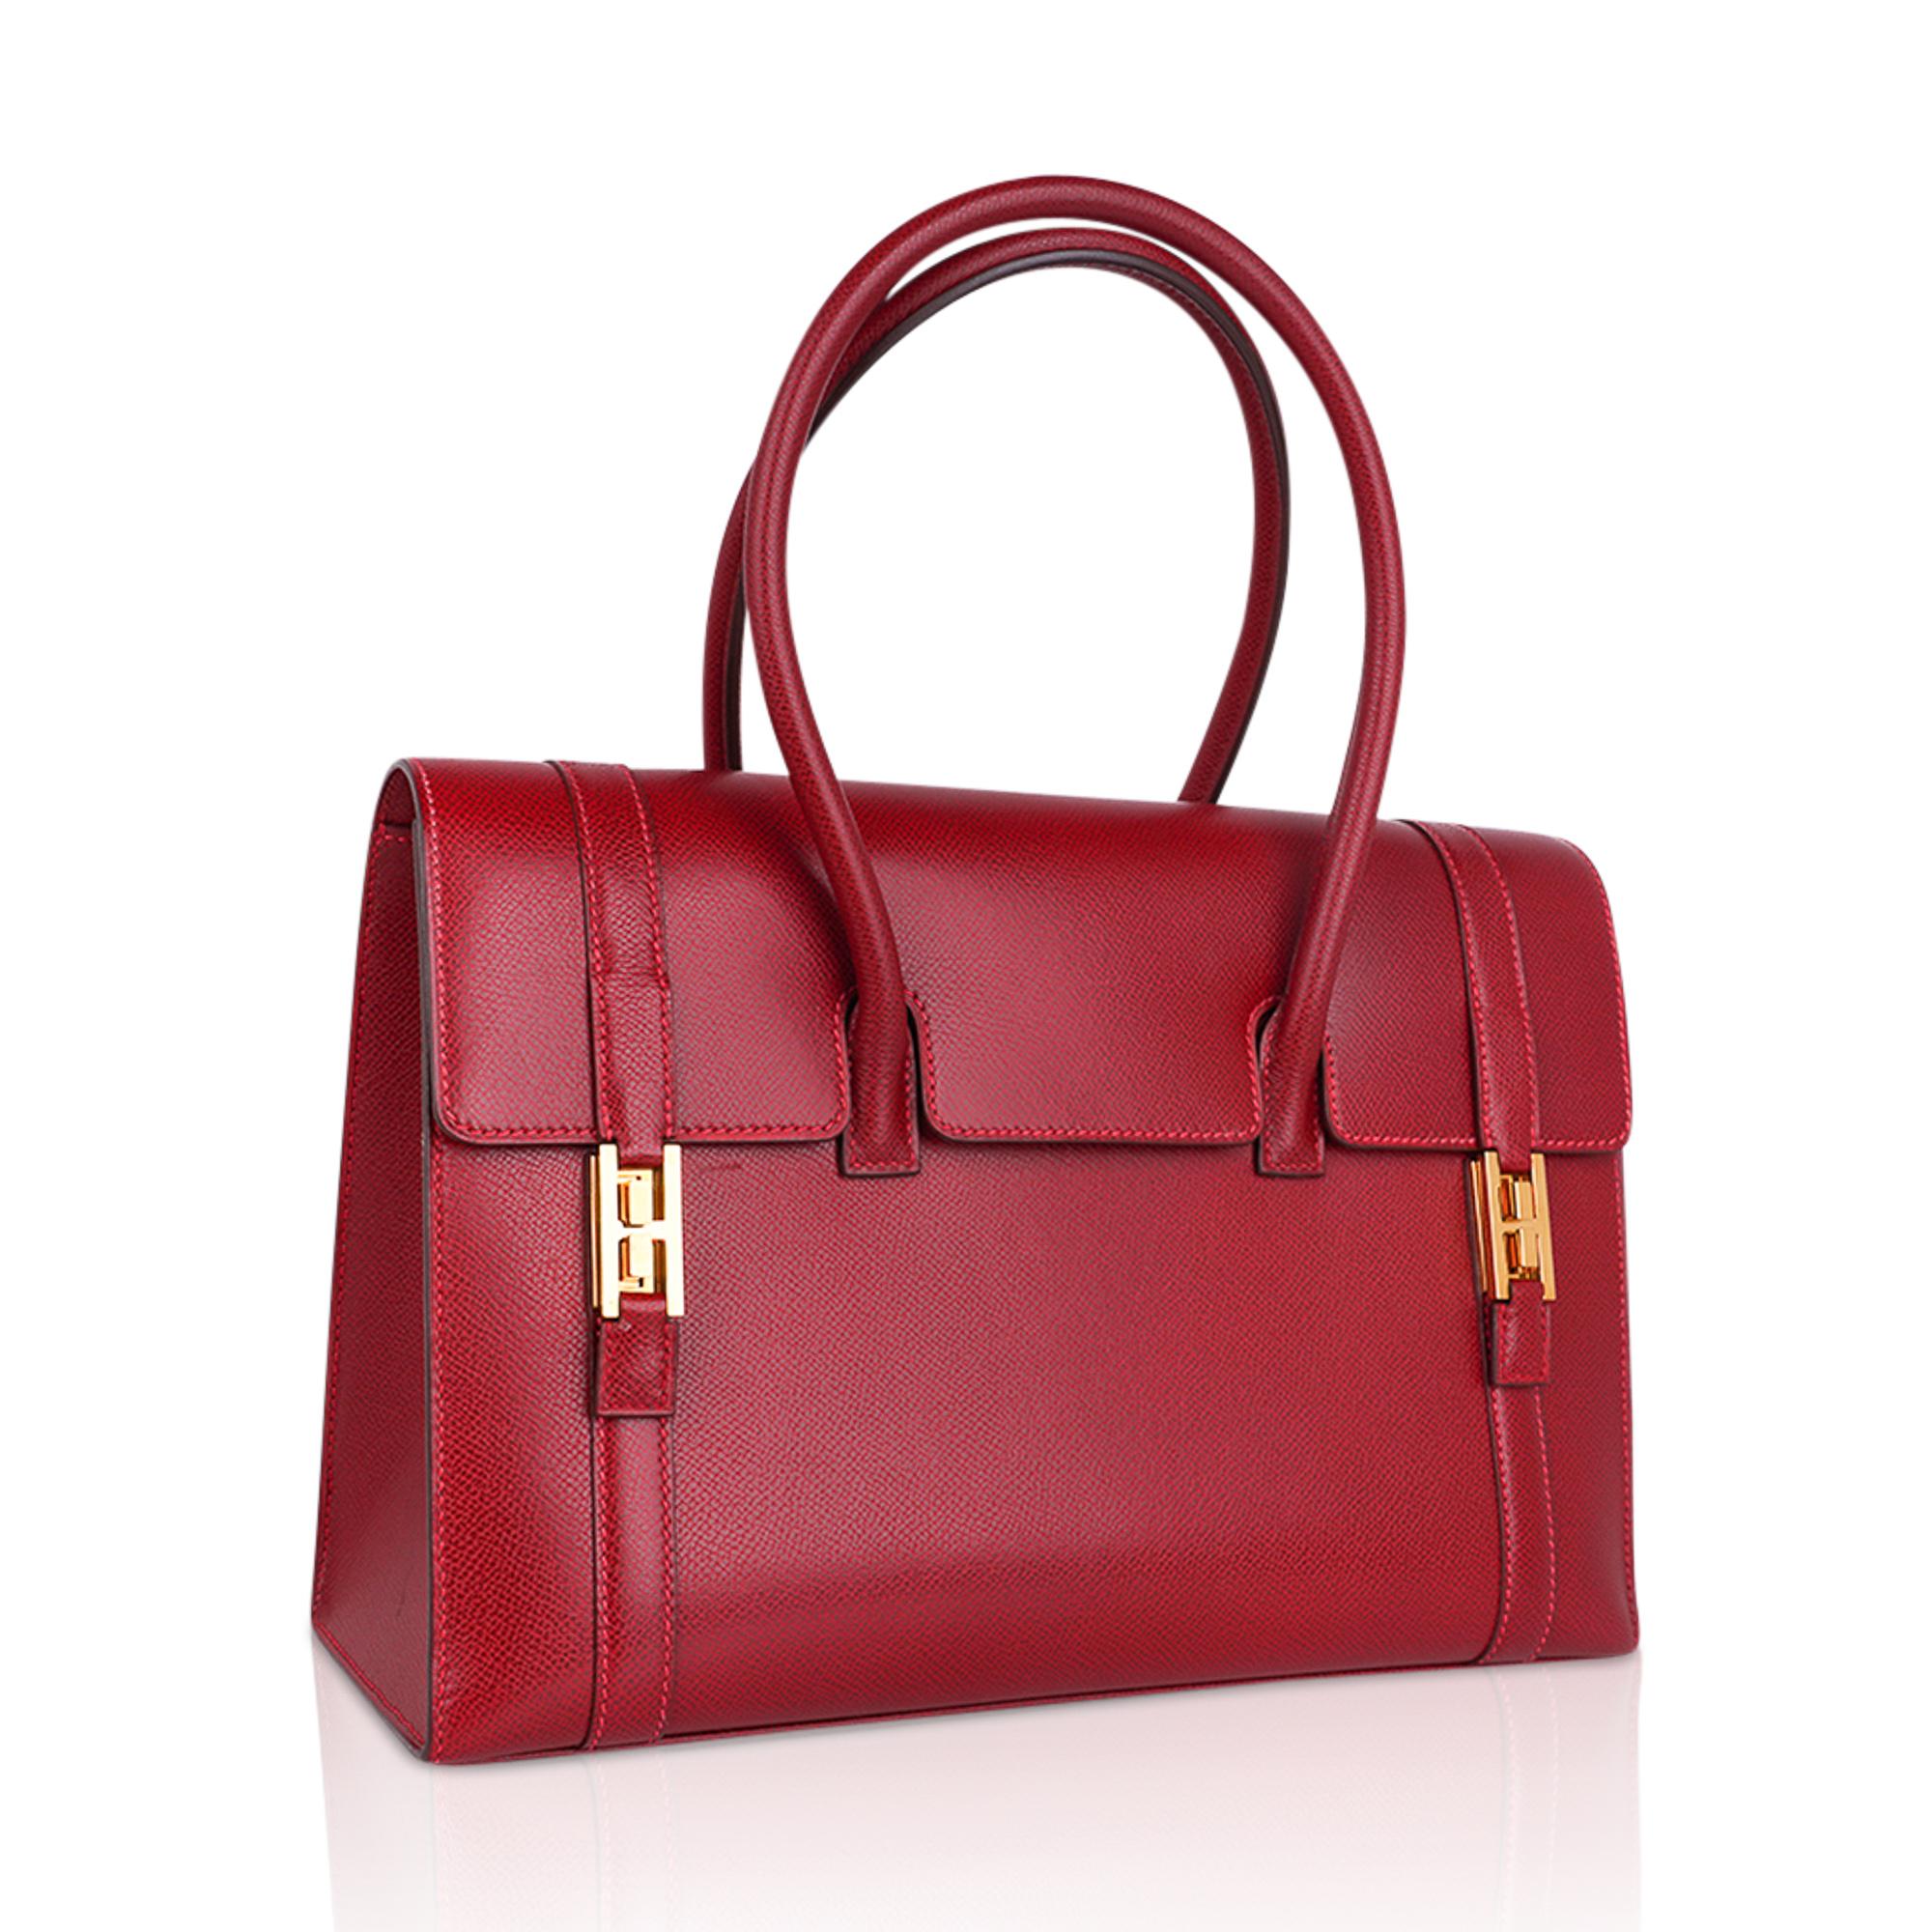 One of the most elegant bags Hermes ever produced in the most gorgeous Hermes Red!
This Rouge Vif beauty is the original production of the Hermes Drag Bag. 
This coveted red is not being produced and is loved with her pink top stitch.
Simply